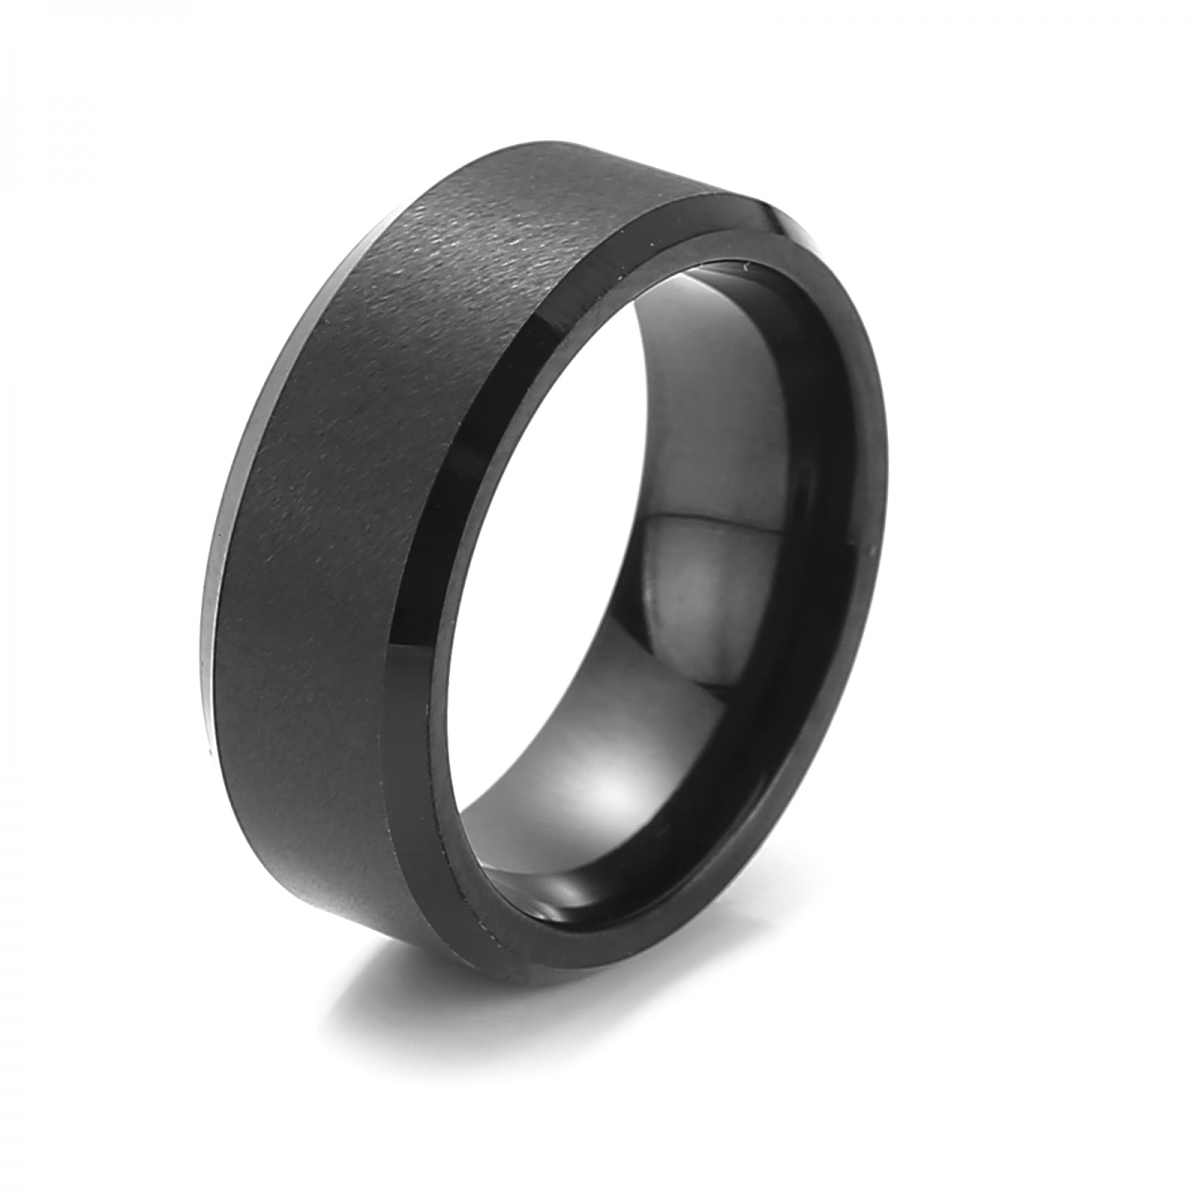 Tungsten Carbide Ring US$4/PC-NORSECOLLECTION- Viking Jewelry,Viking Necklace,Viking Bracelet,Viking Rings,Viking Mugs,Viking Accessories,Viking Crafts